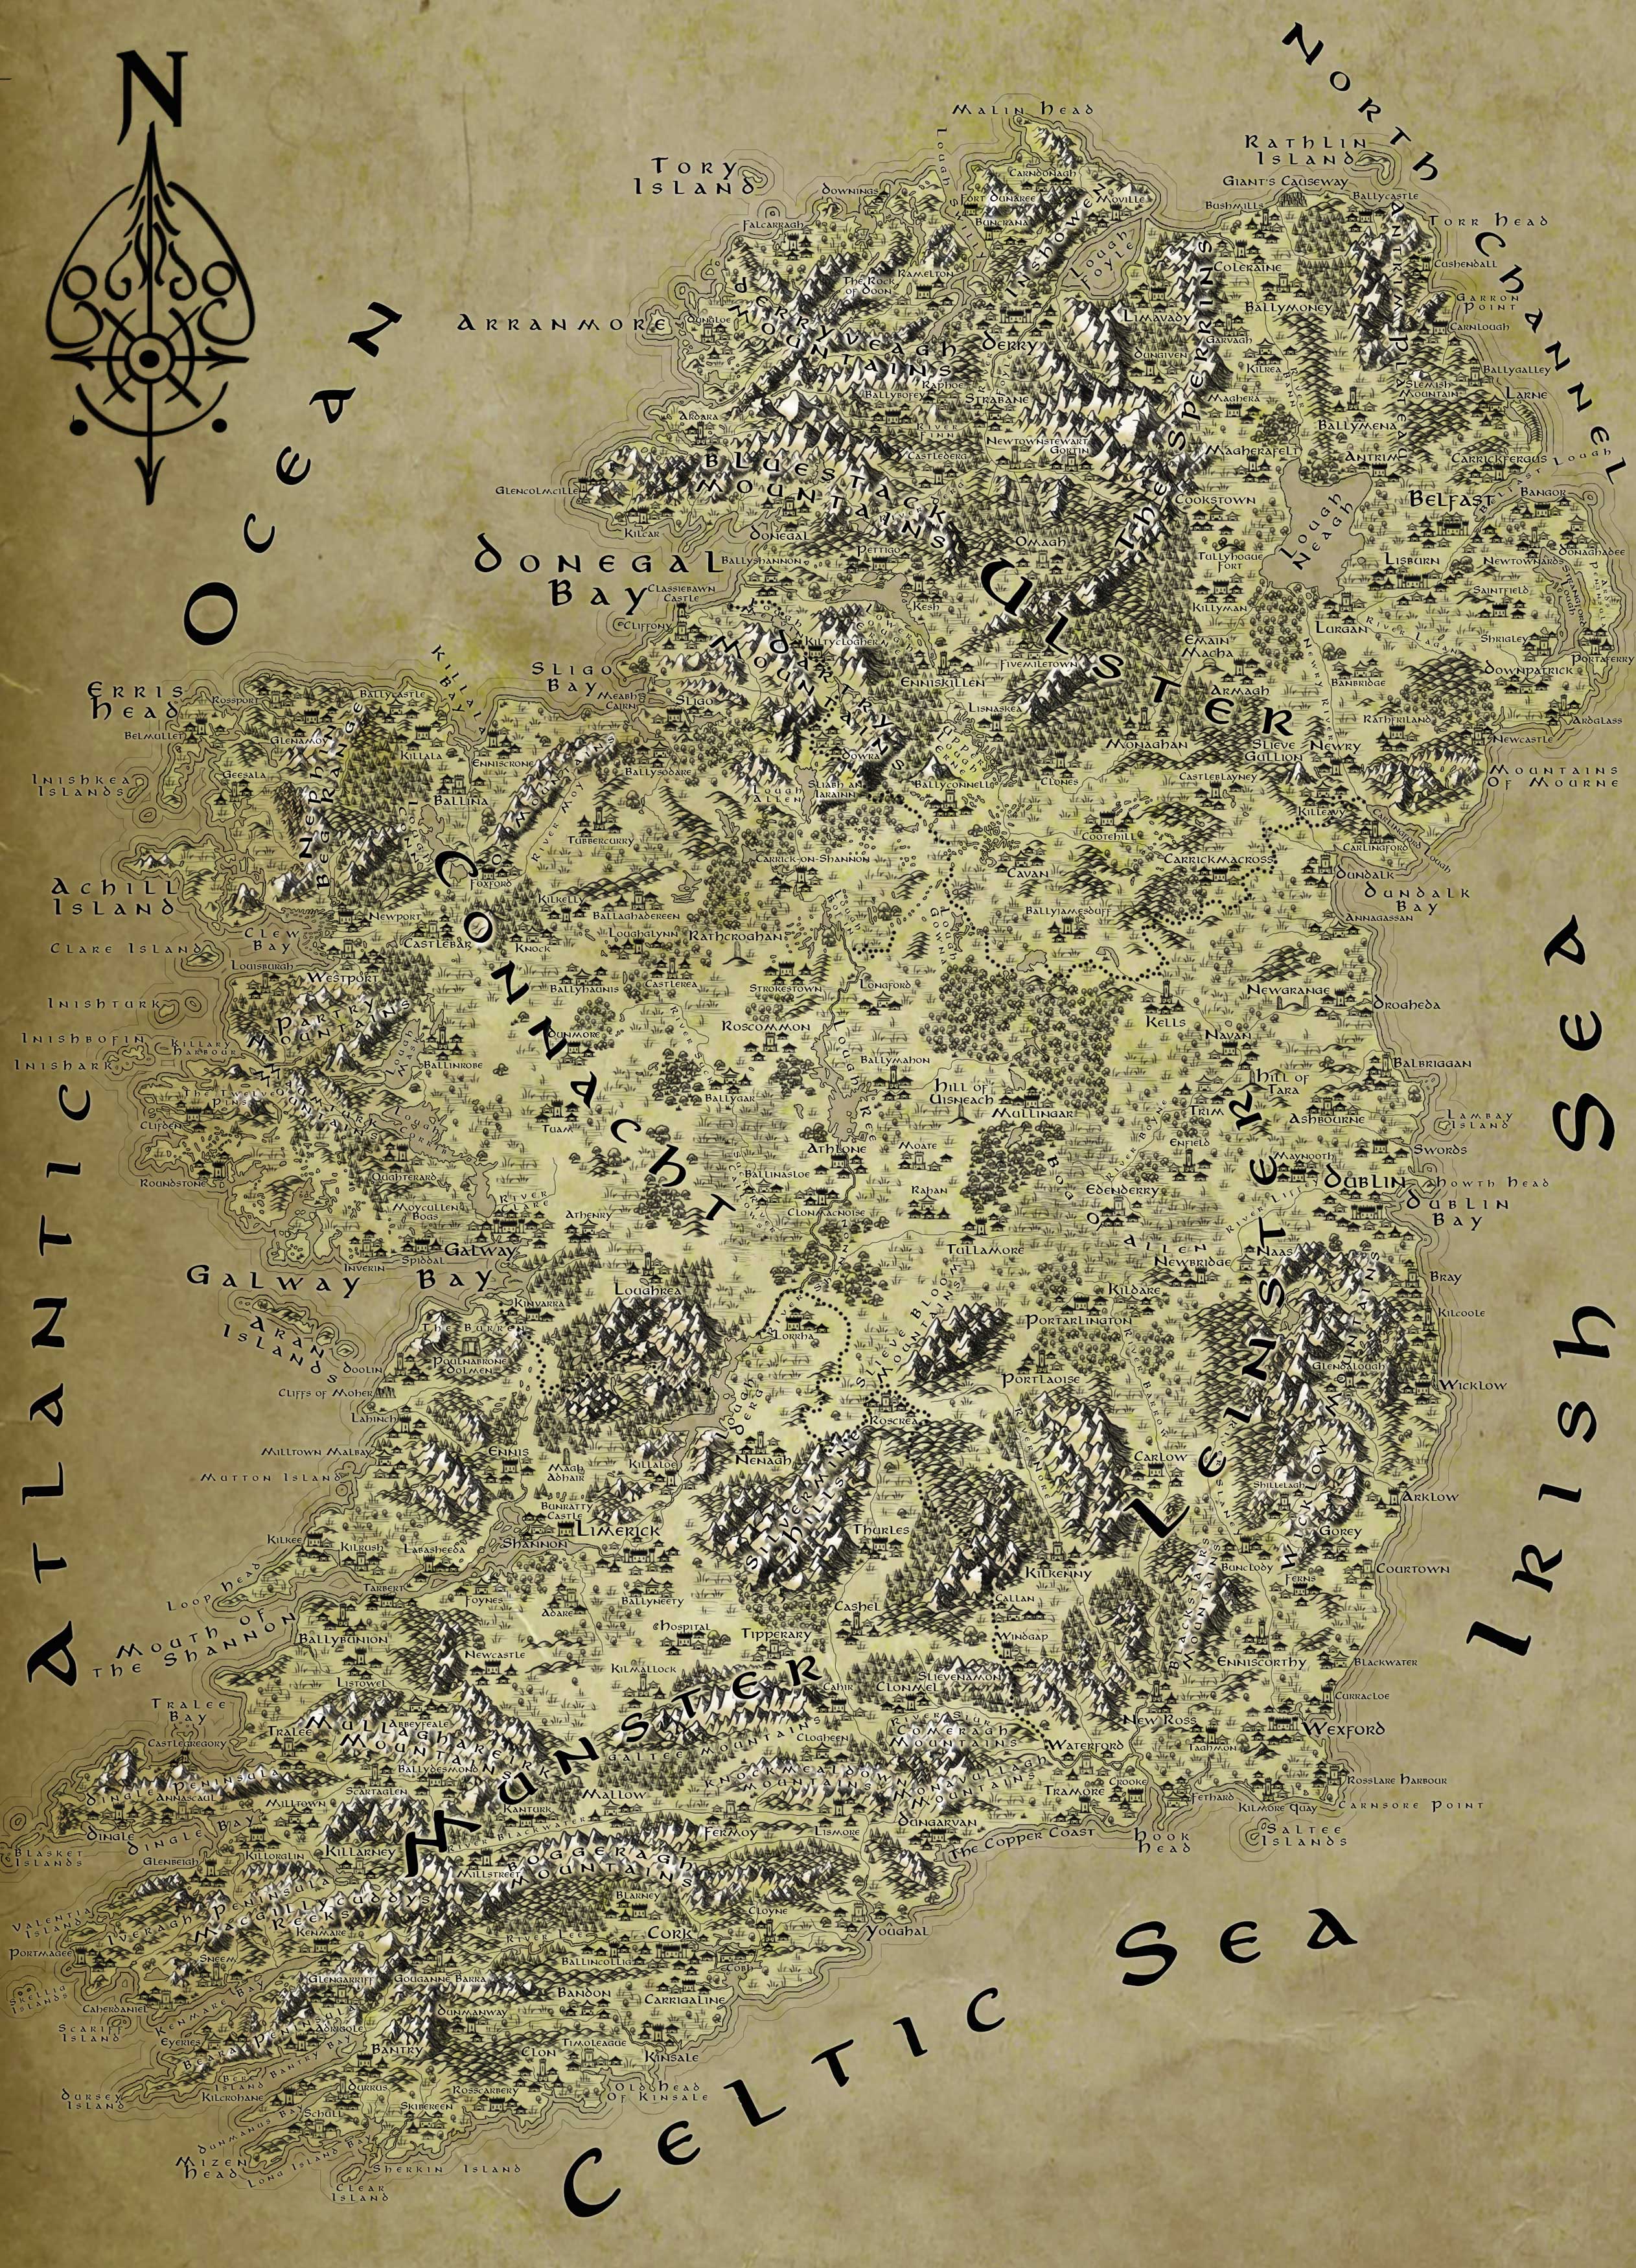 lord of the rings map wallpaper